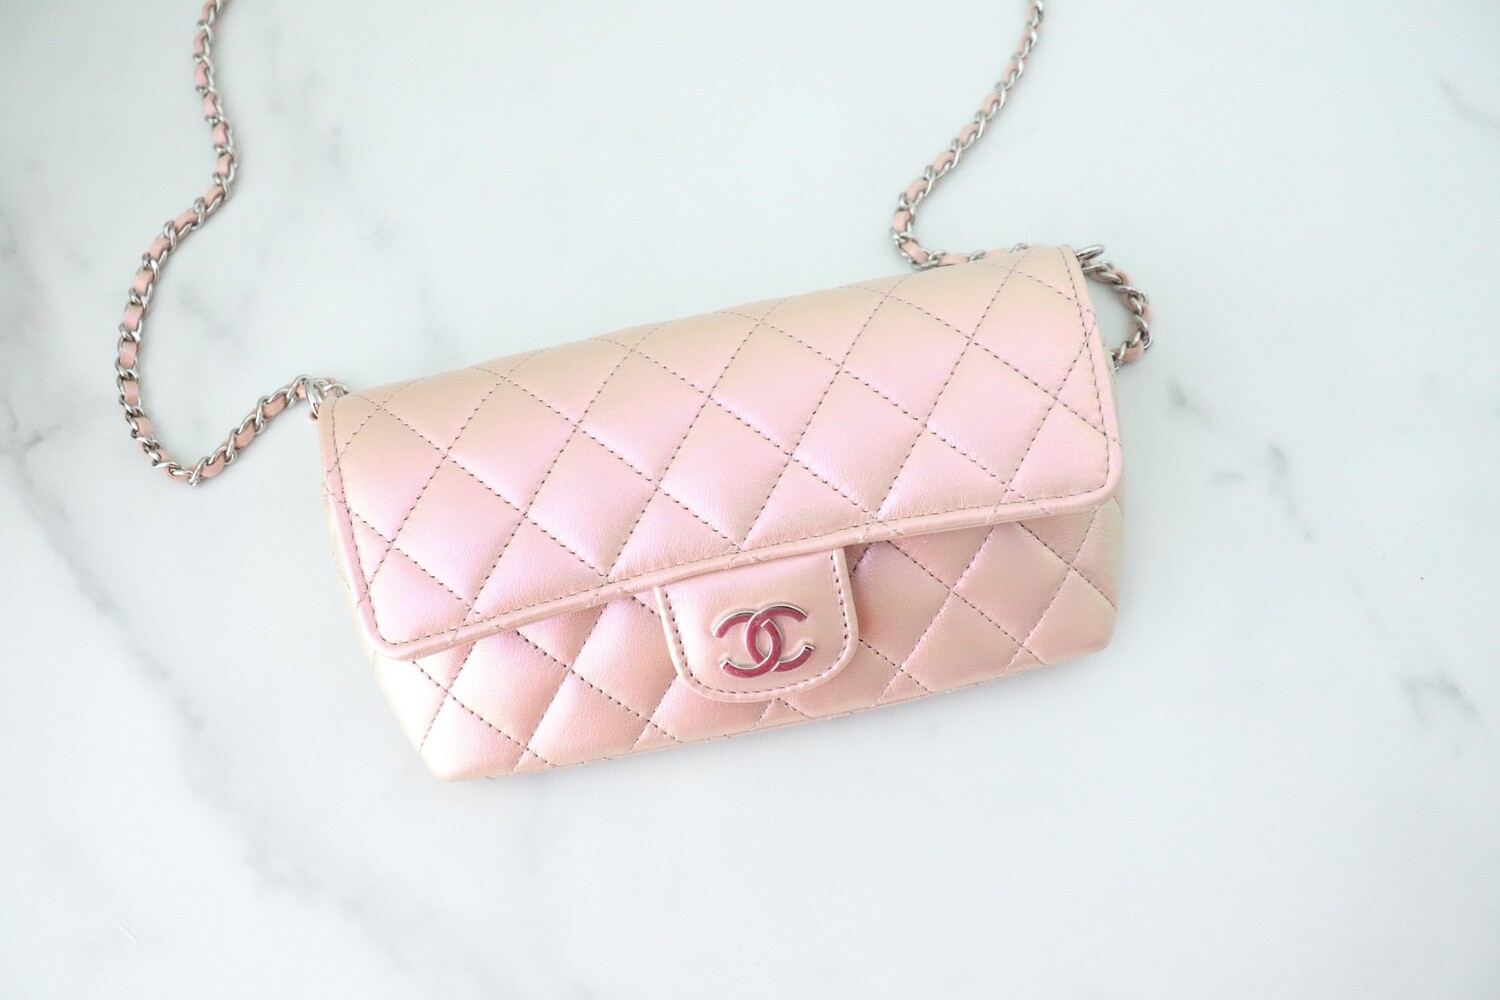 Chanel Sunglasses Case on Chain, Iridescent Pink Lambskin Leather with  Silver Hardware, New in Box GA001